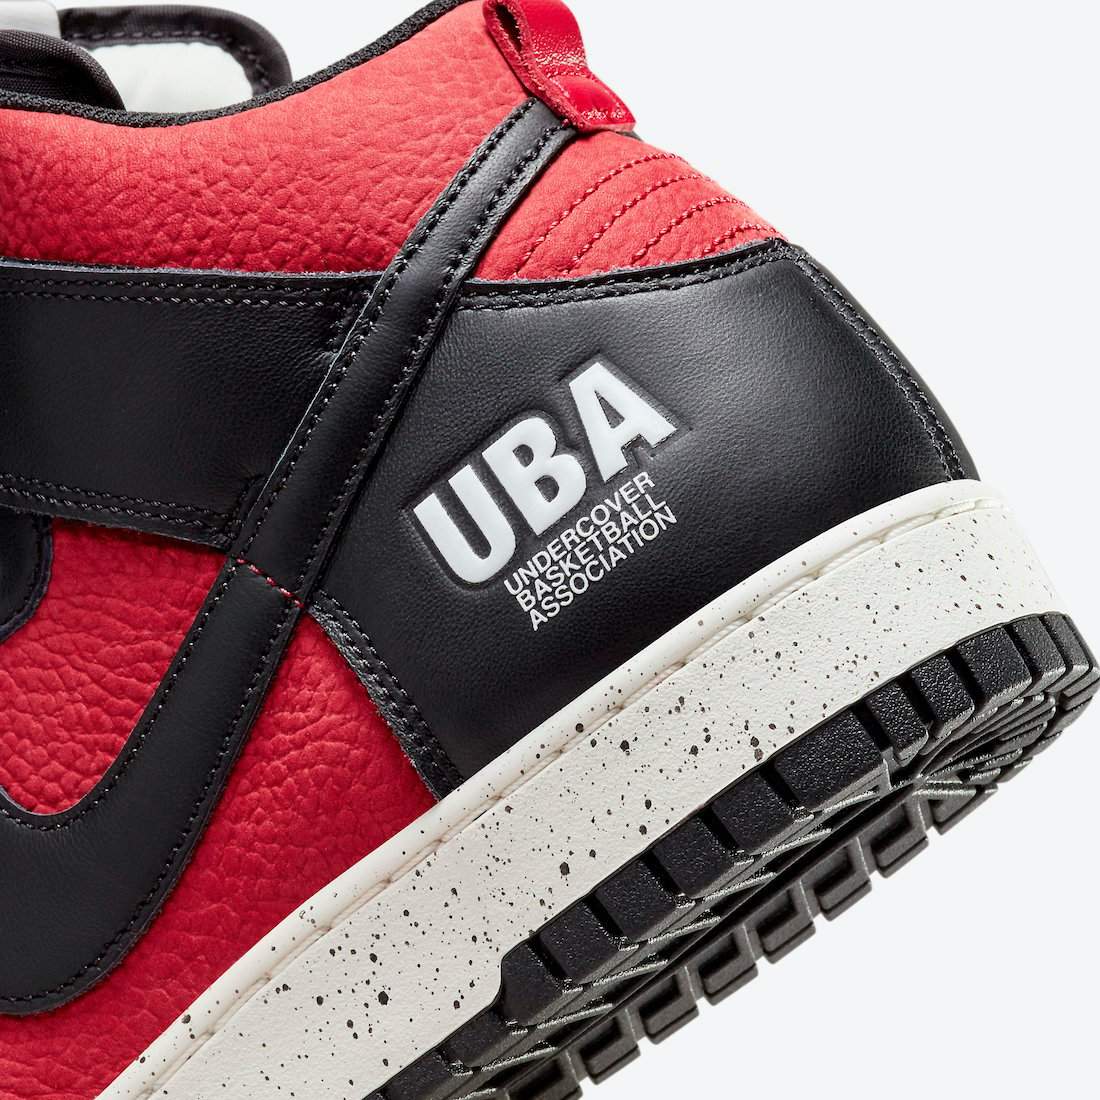 Undercover Nike Dunk High UBA Gym Red DD9401-600 Release Date